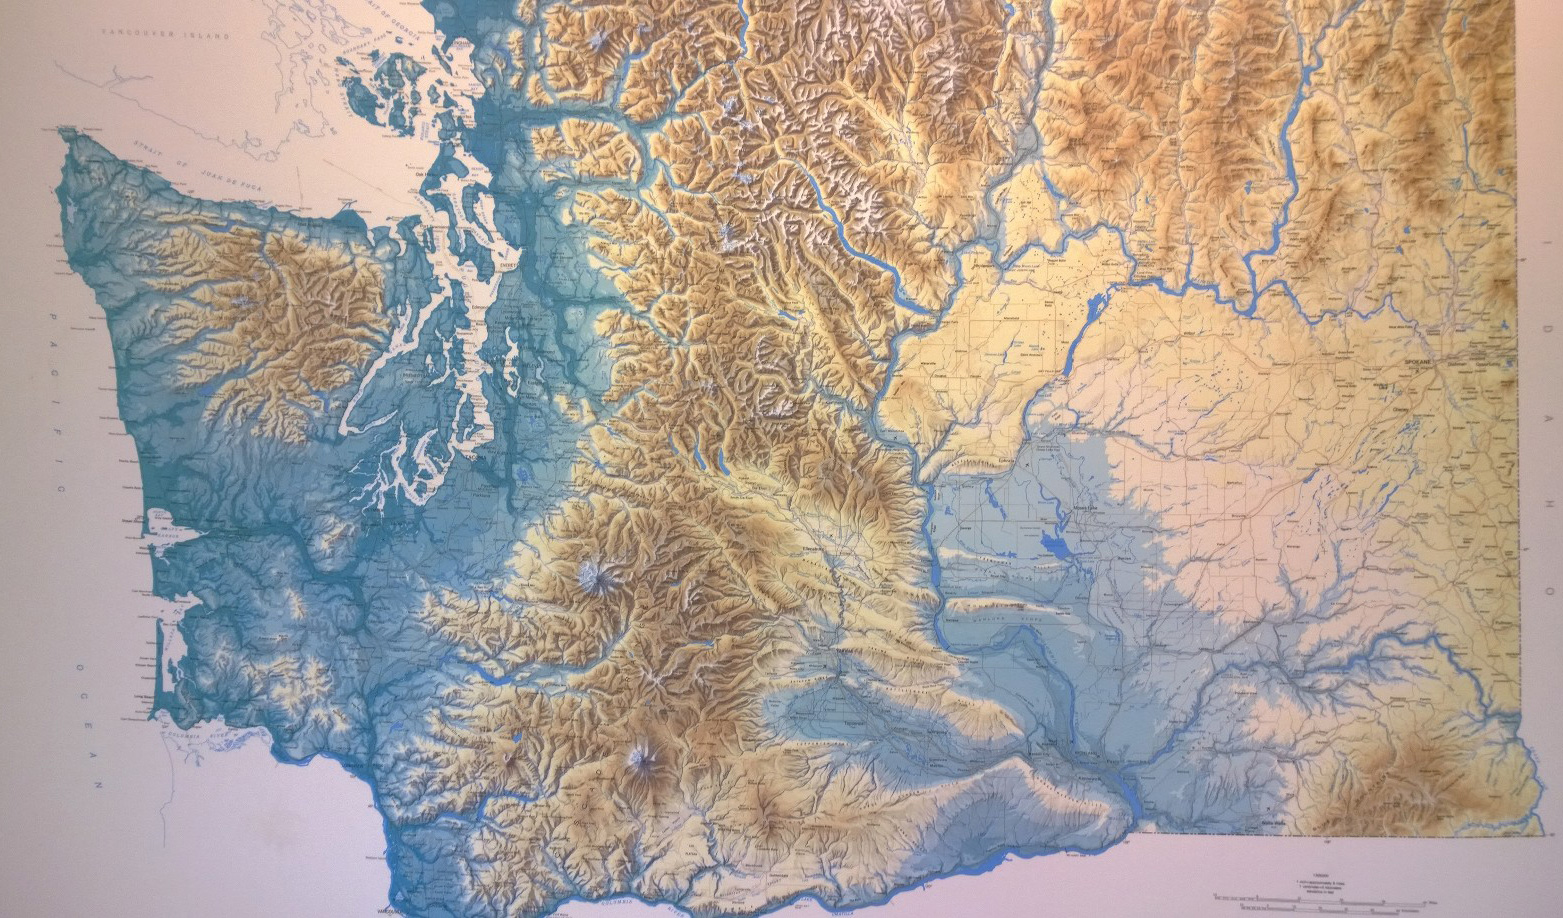 Washington topographical map. Photo by Morf Morford, picture taken at UW-Tacoma